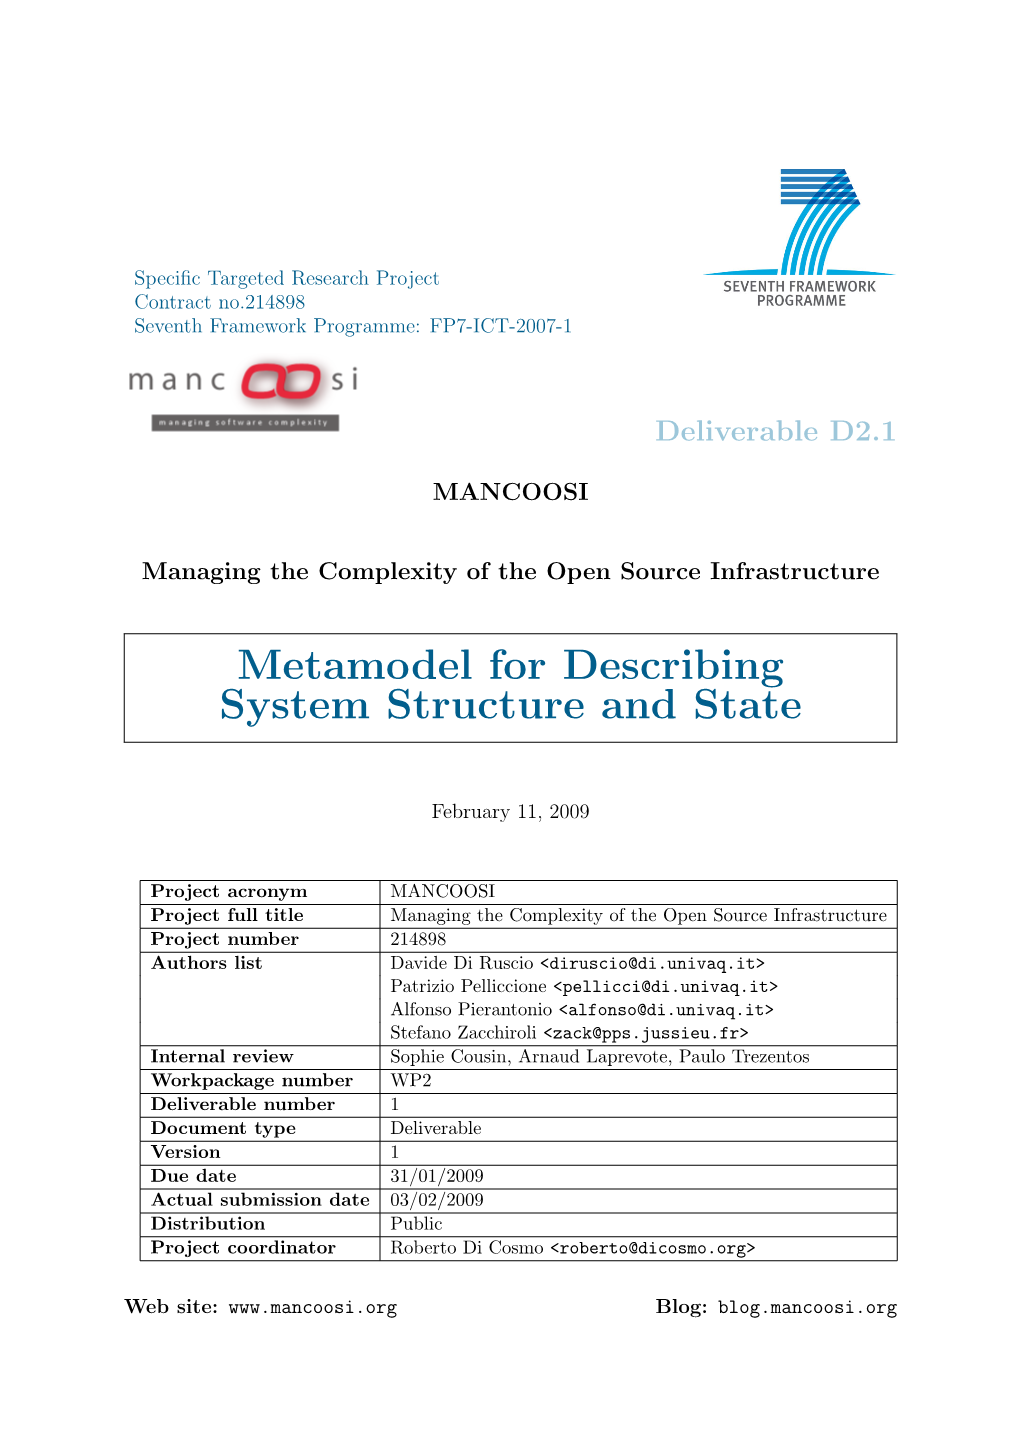 Metamodel for Describing System Structure and State